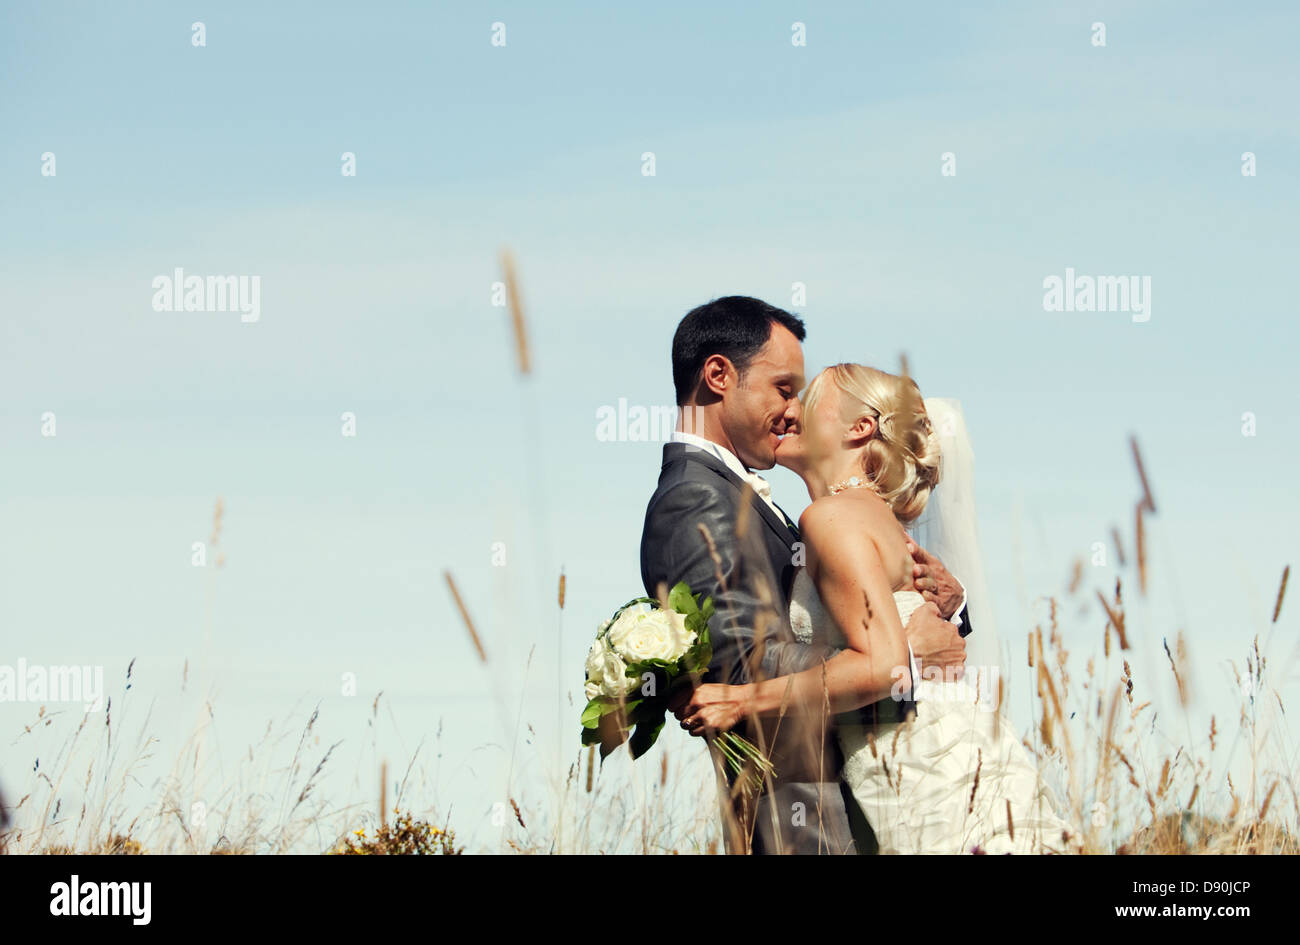 Bride and groom kissing in field Stock Photo